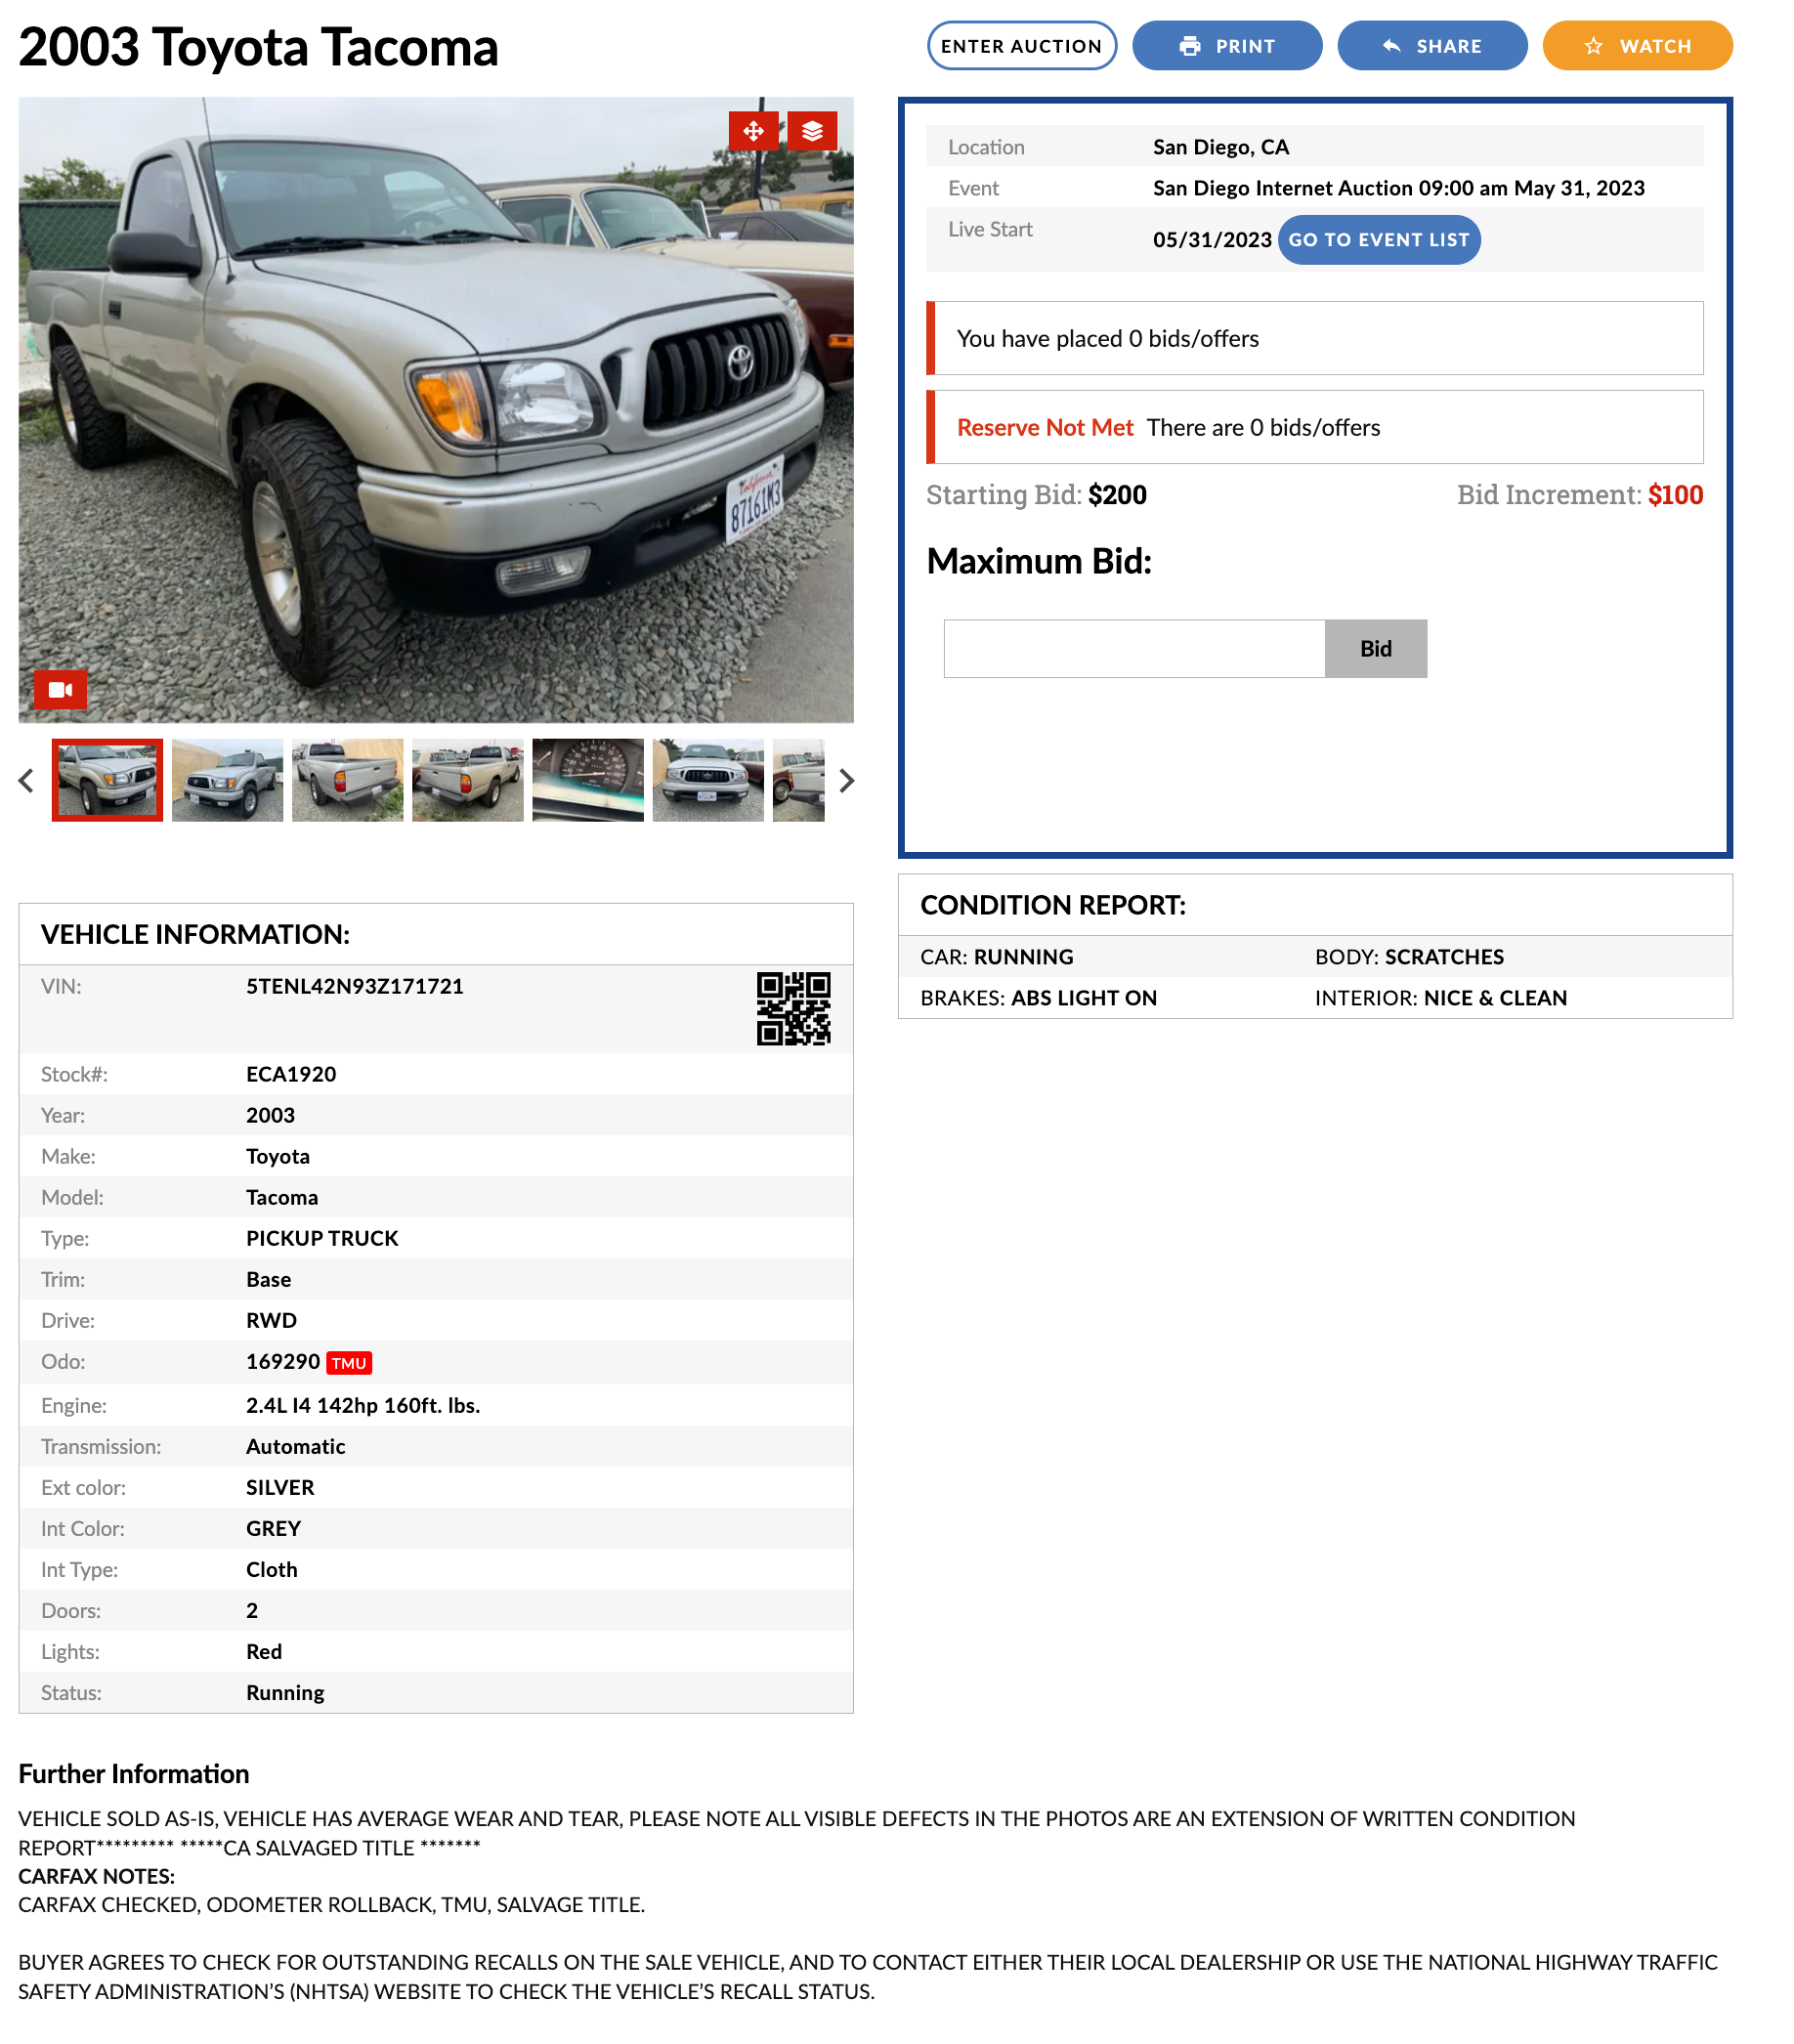 A 2003 Toyota Tacoma up for sale at Express Auto Auction